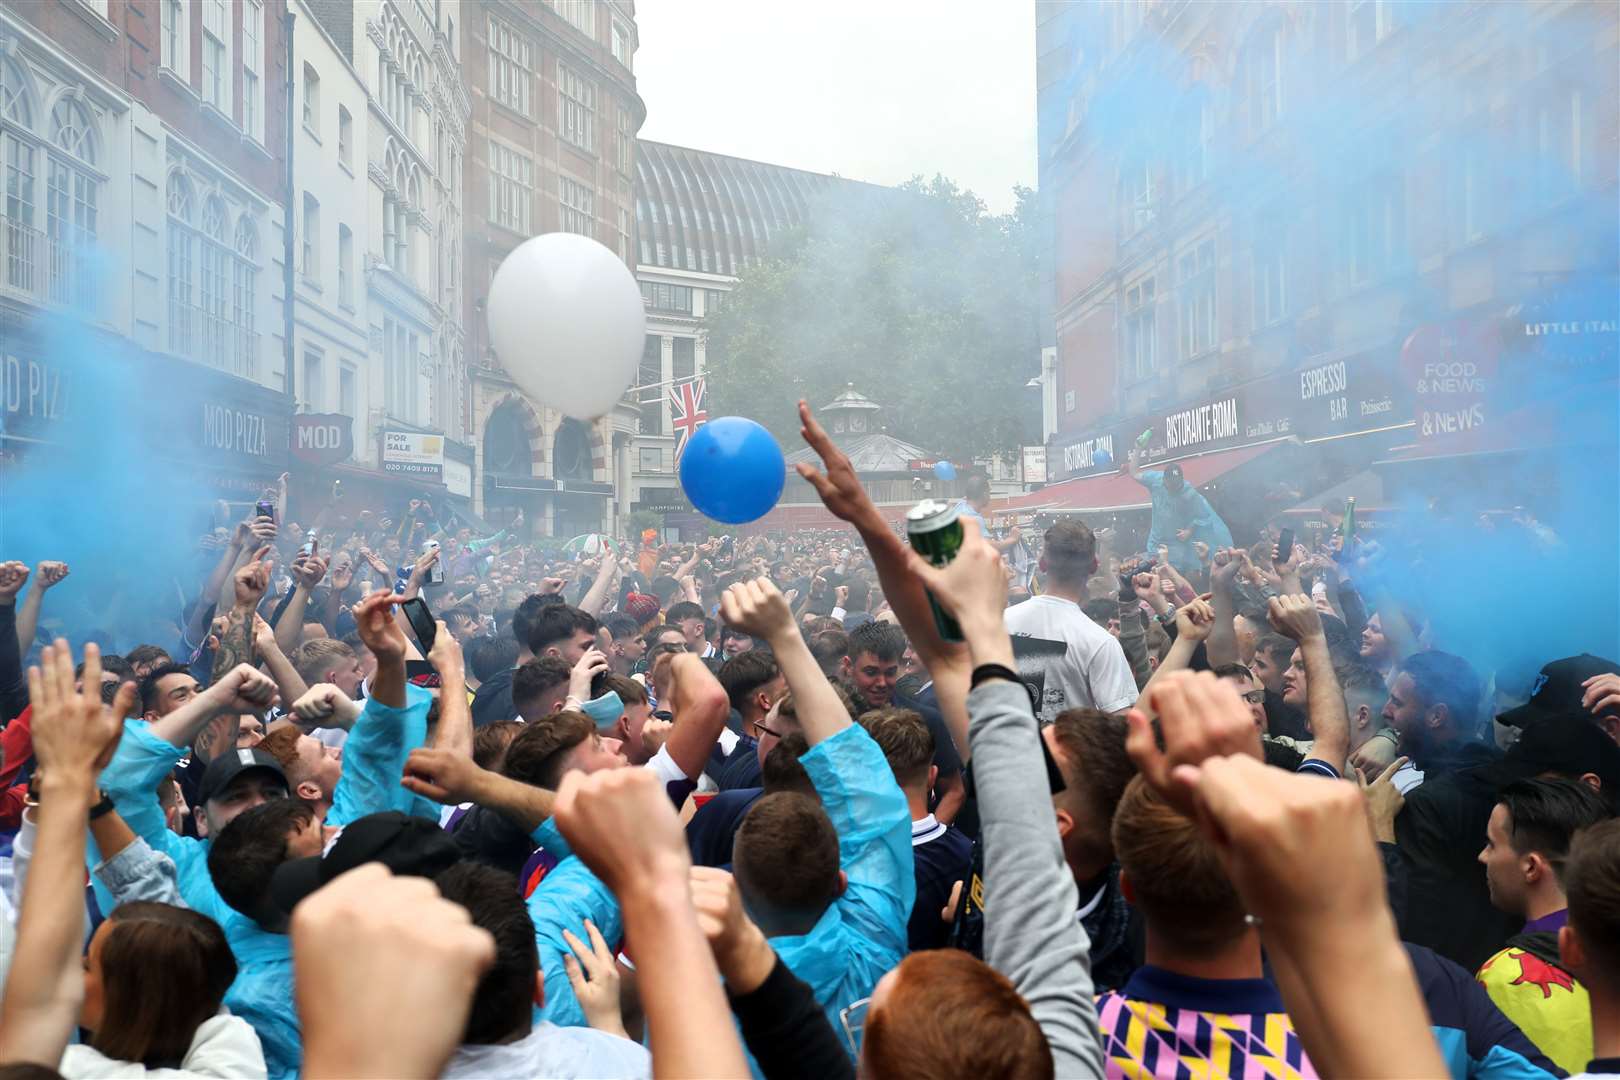 Scotland fans set off blue smoke grenades in Leicester Square ahead of their match against England tonight (Kieran Cleeves/PA)